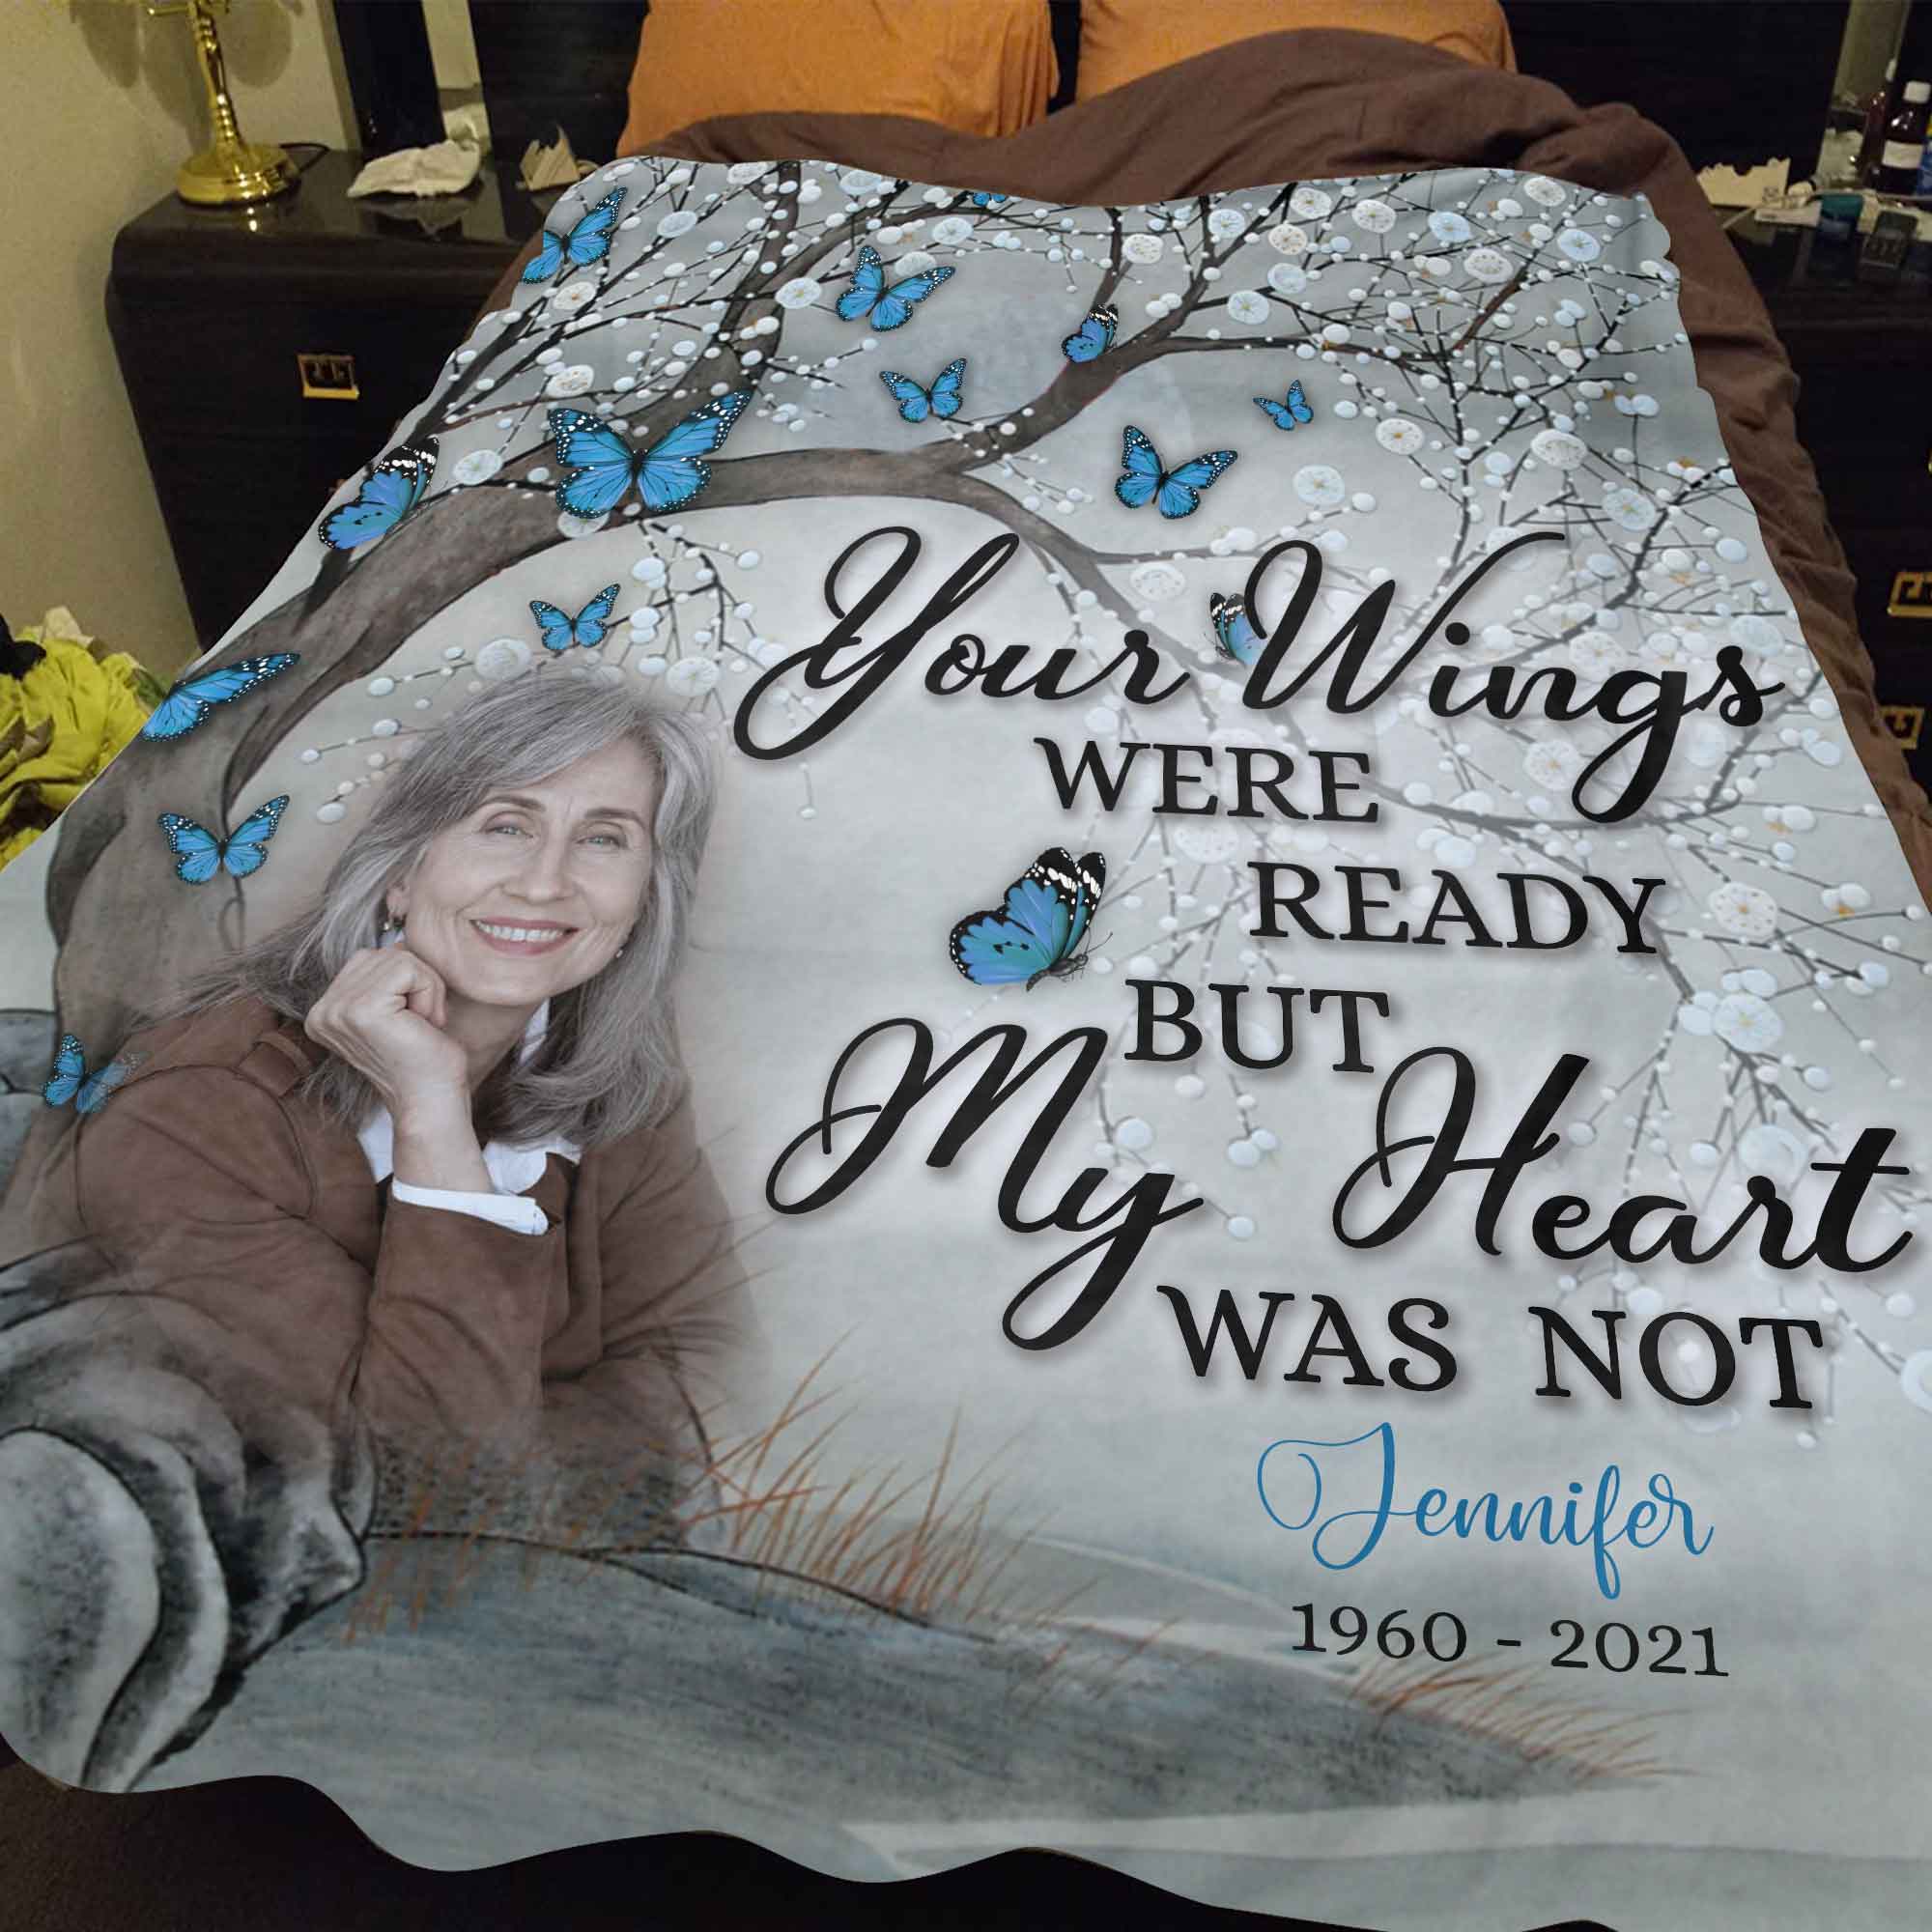 Personalized Memorial Blankets With Pictures For Loss Of Sister, Condolences Blankets, Your Wing Were Ready Blanket